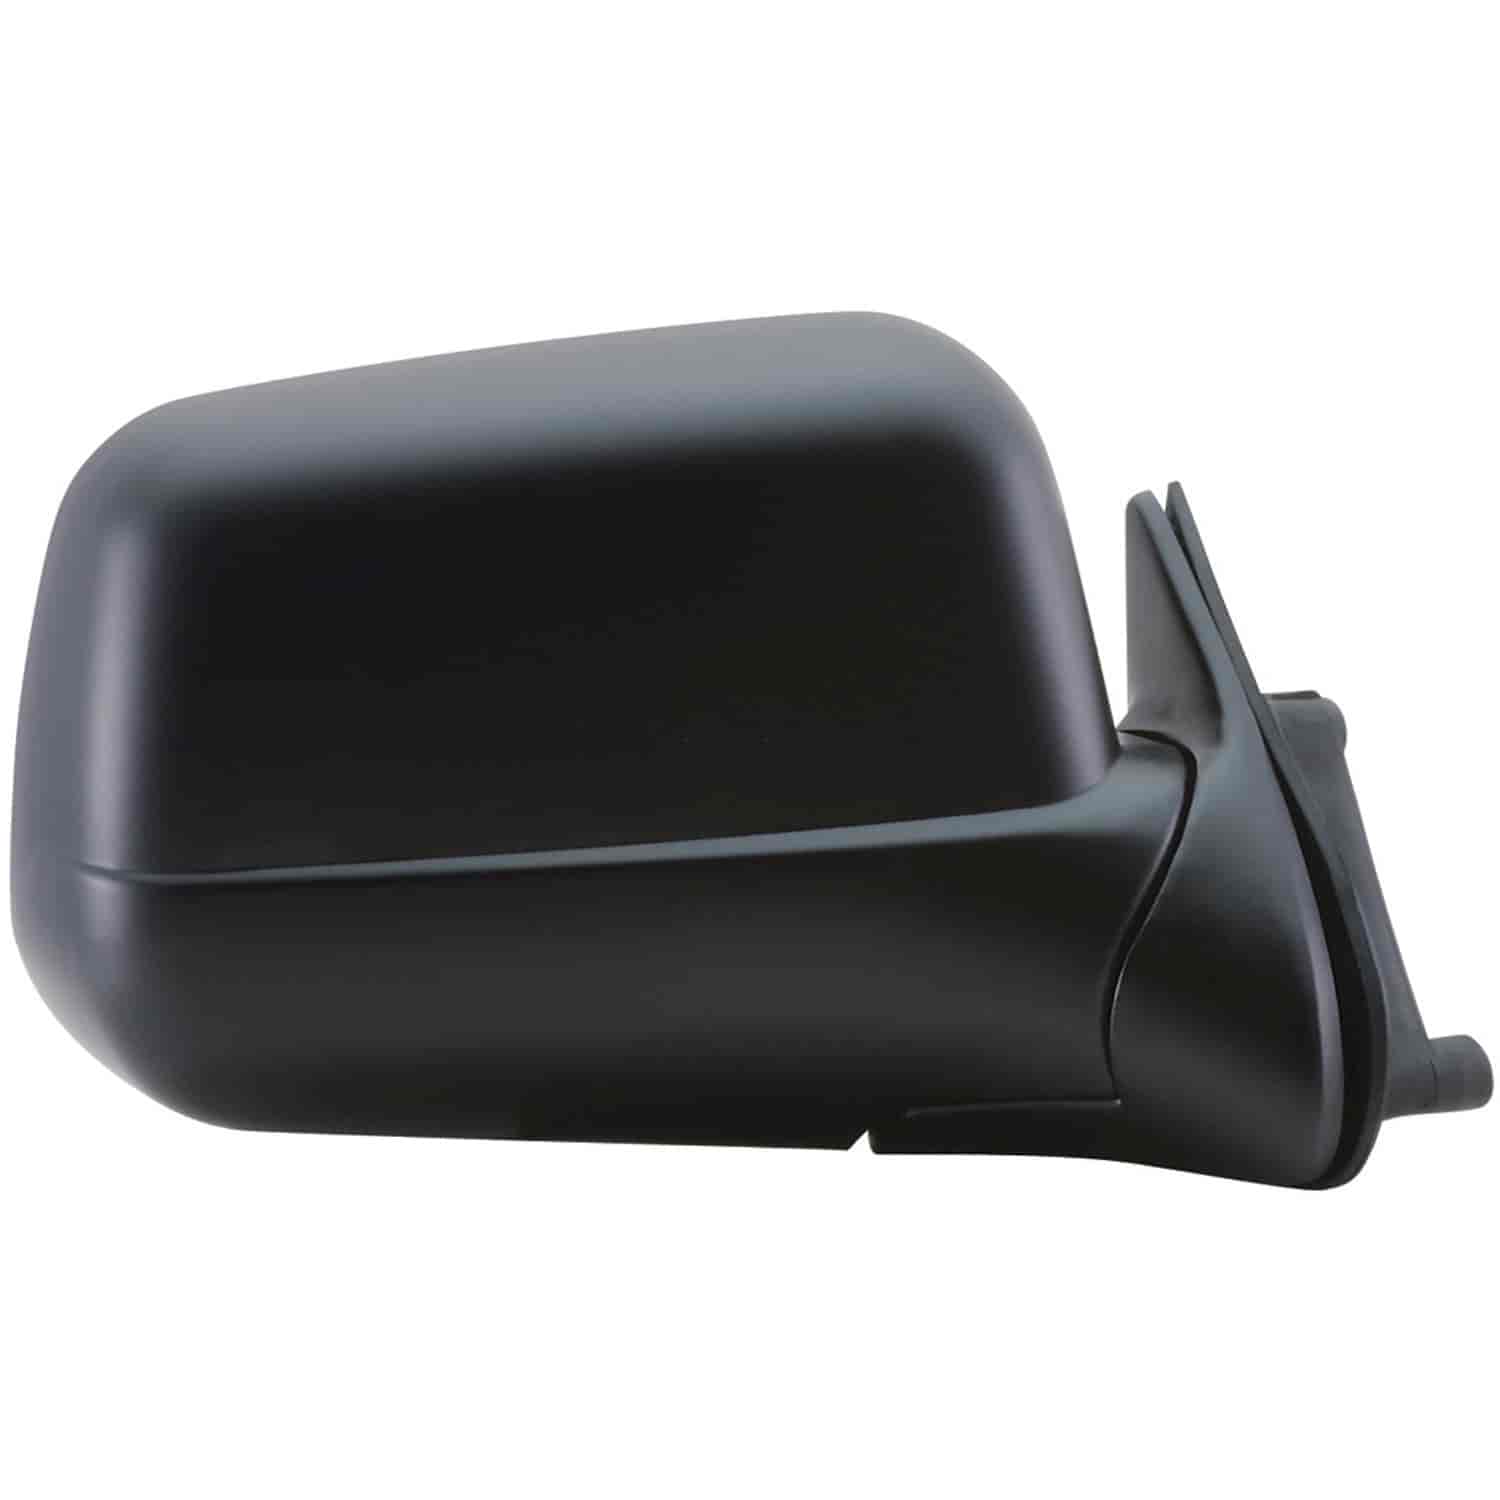 OEM Style Replacement mirror for 98-04 Nissan Frontier 00-04 Xterra passenger side mirror tested to